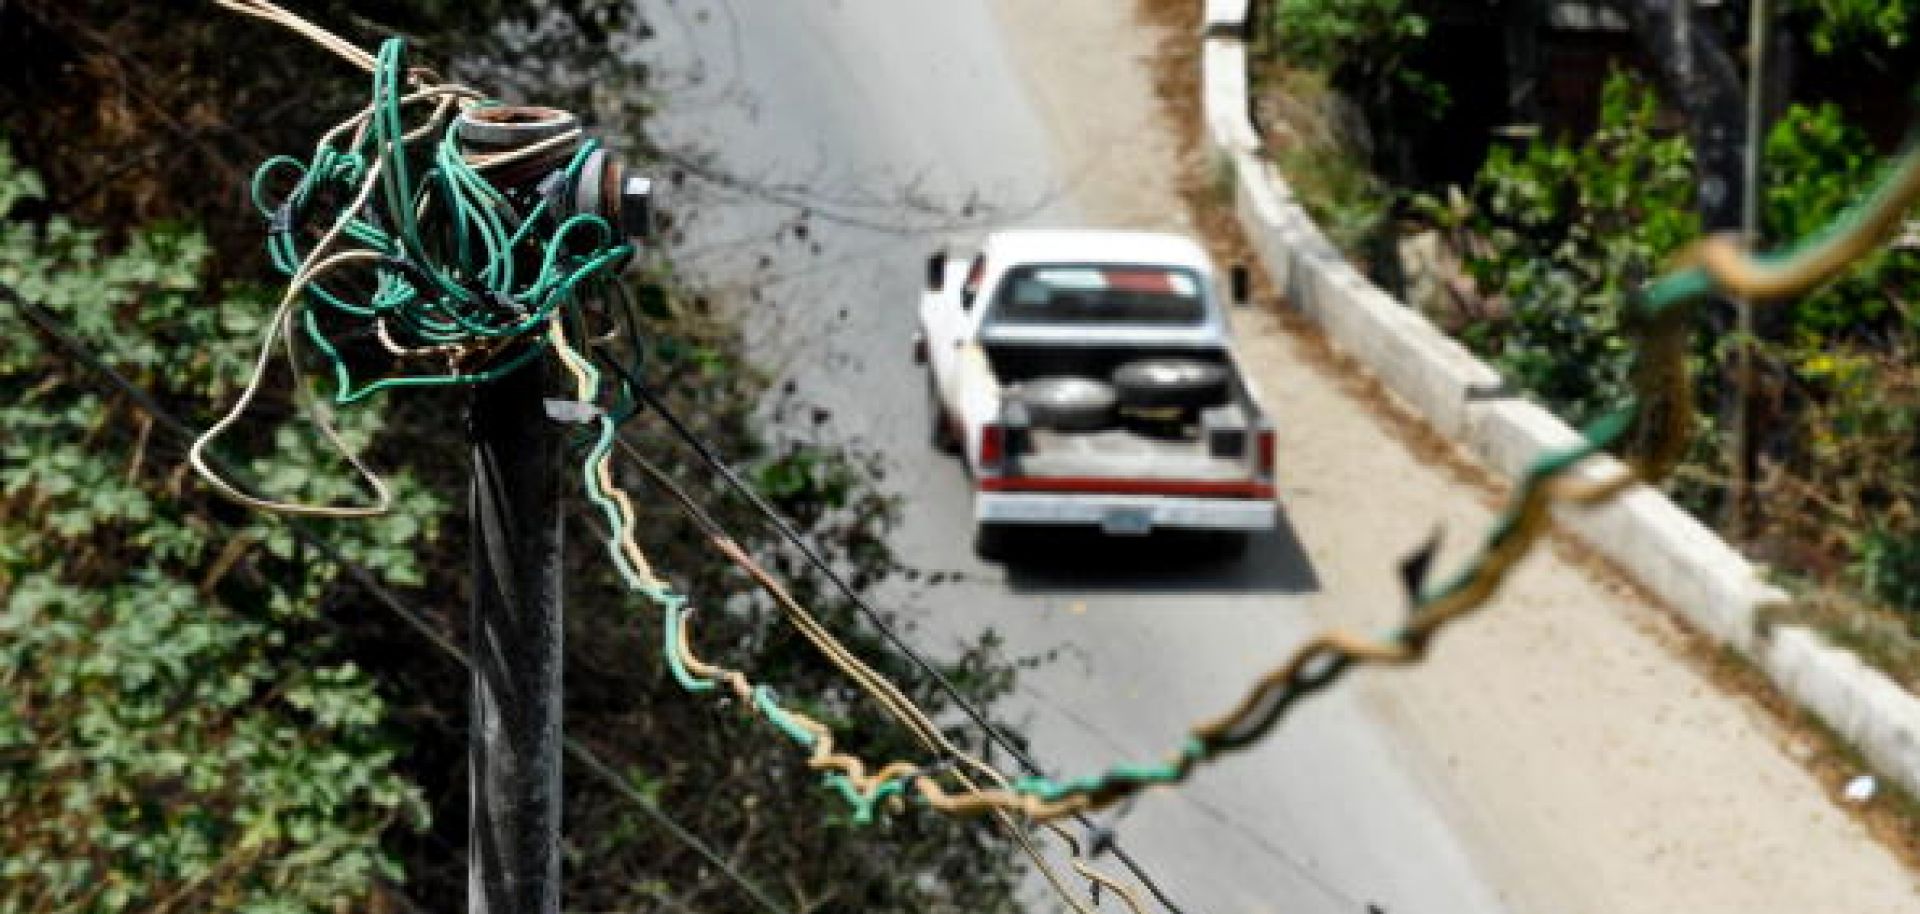 An illegal connection to the public electricity grid in Caracas on March 4